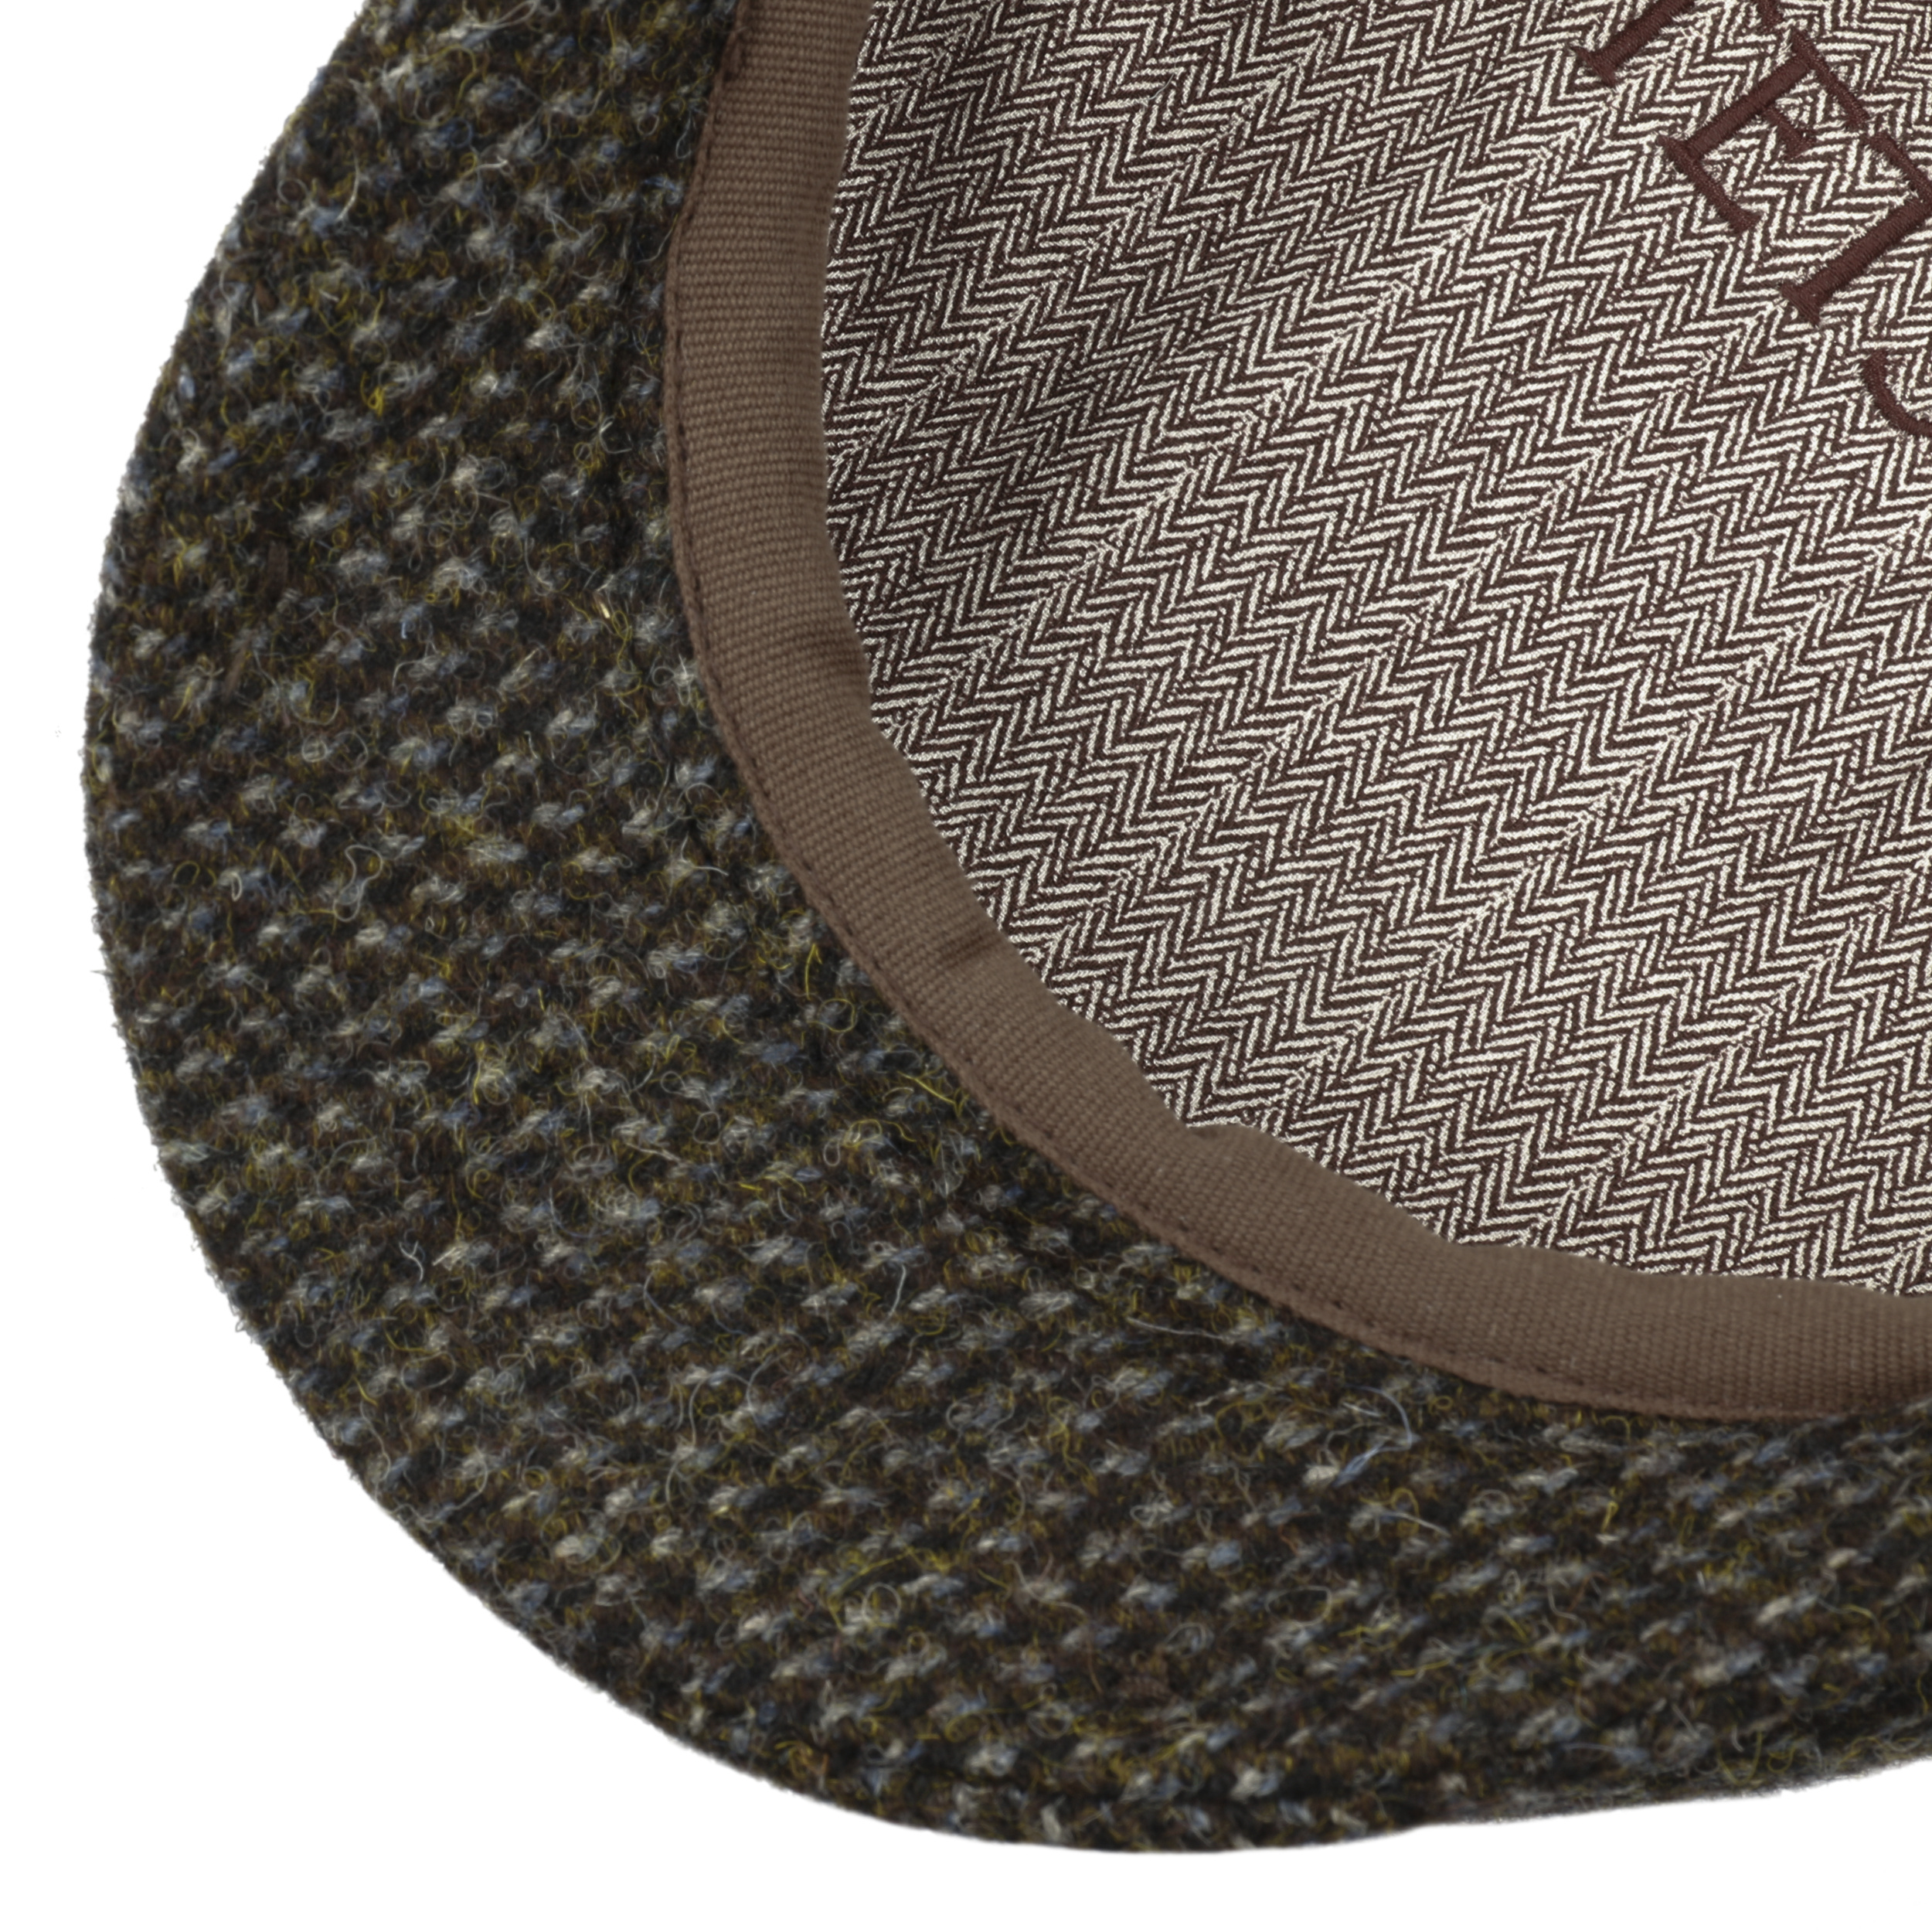 Maguire Flat Cap with Ear Flaps by Stetson - 129,00